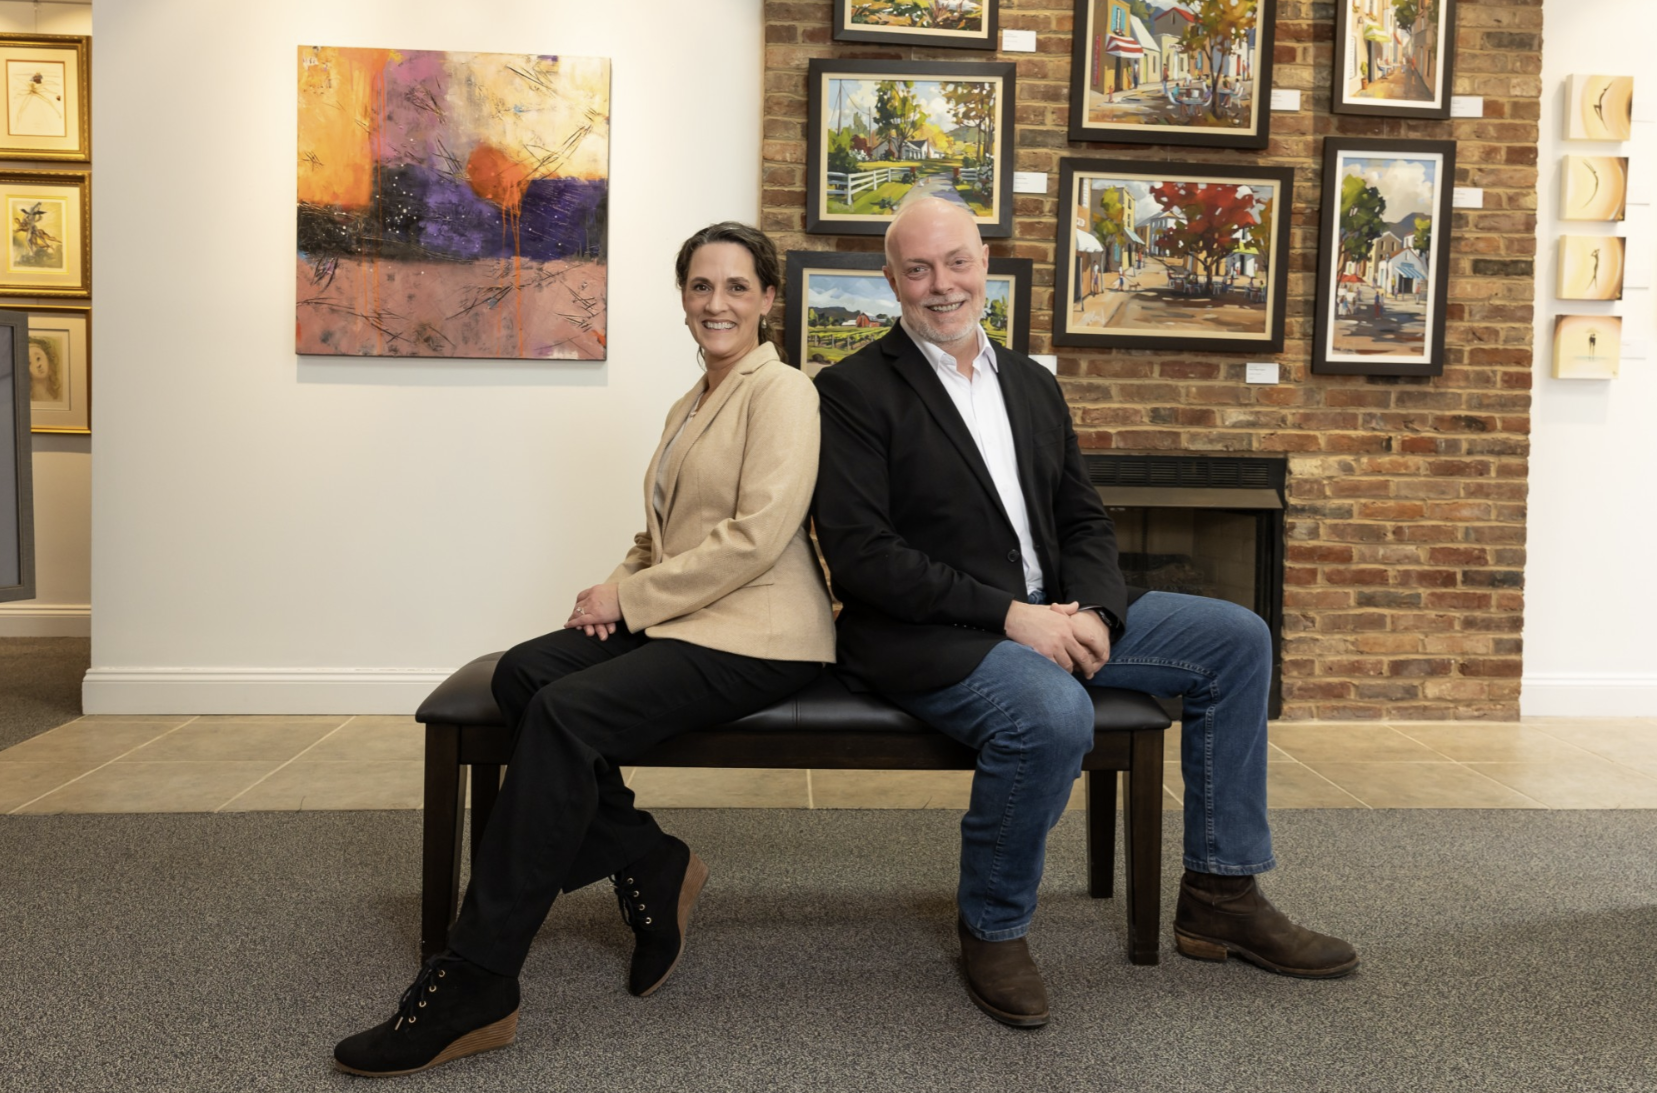 Rebecca and Thomas Ferleman sit on a bench in their art gallery